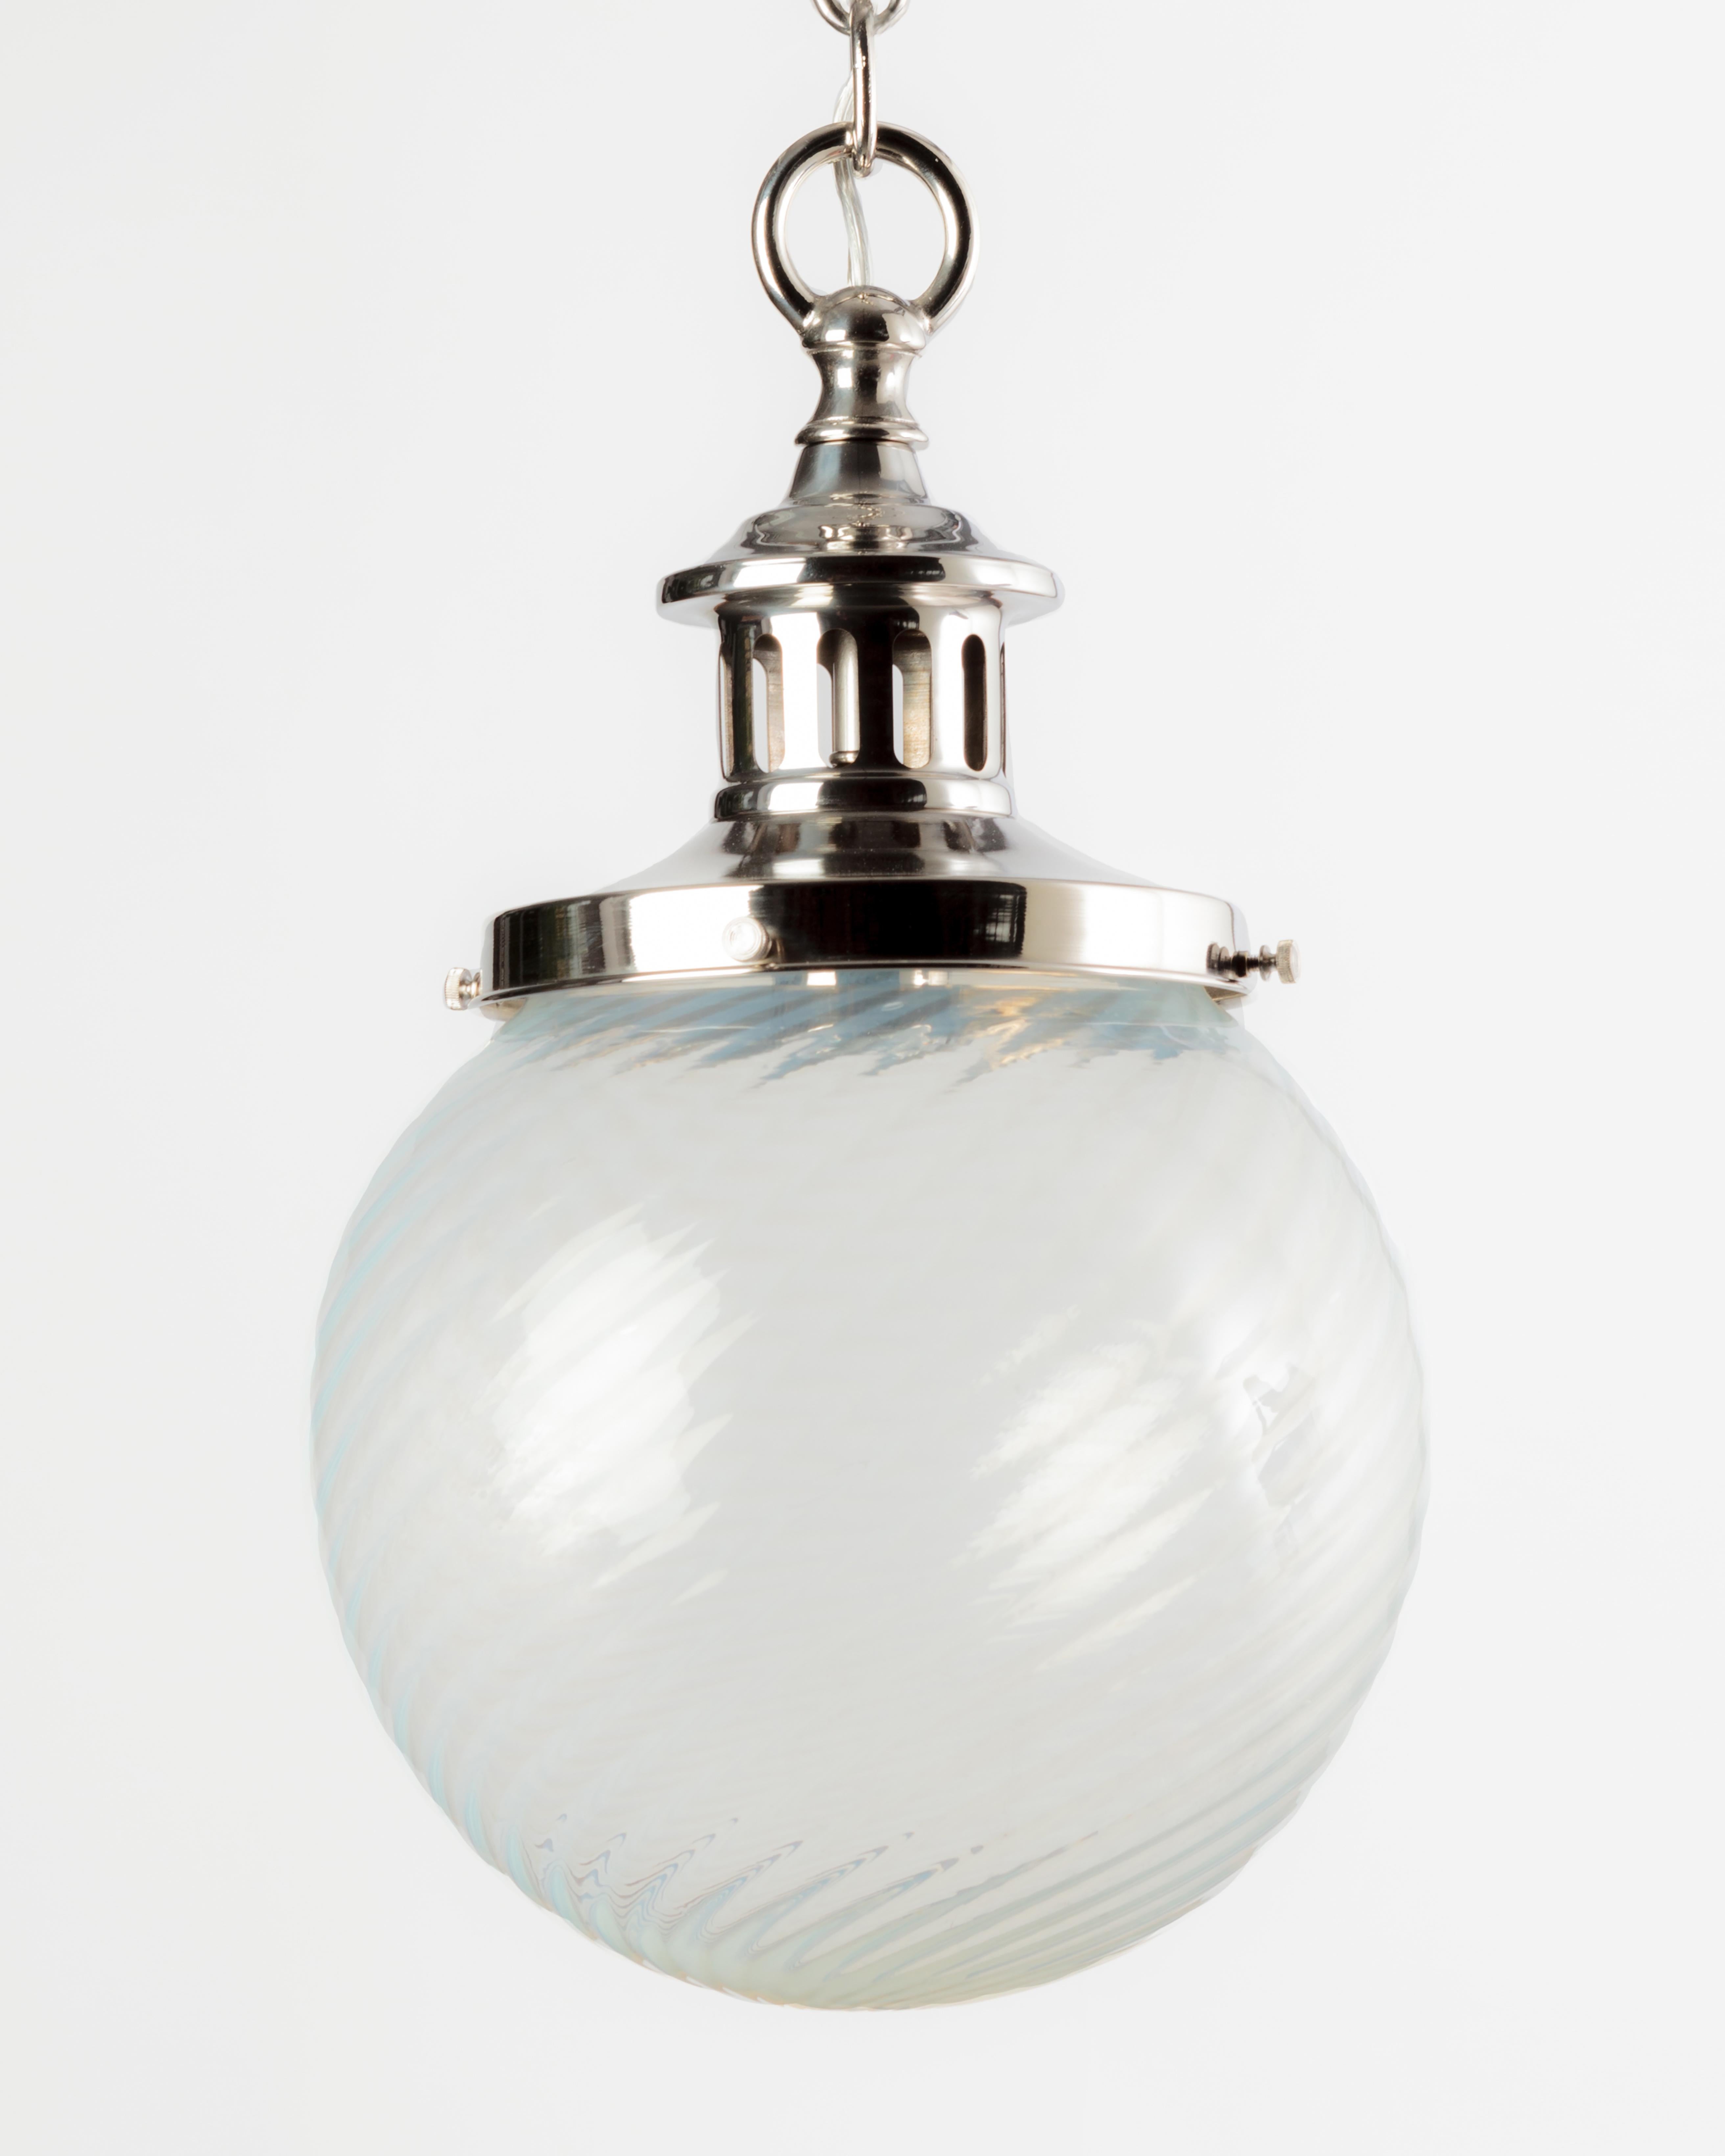 AHL3759

Circa 1900
An antique pendant with a swirled opalescent glass shade on nickel fittings custom made in the Remains Lighting Co. workshop.

Dimensions:
Current height: 58